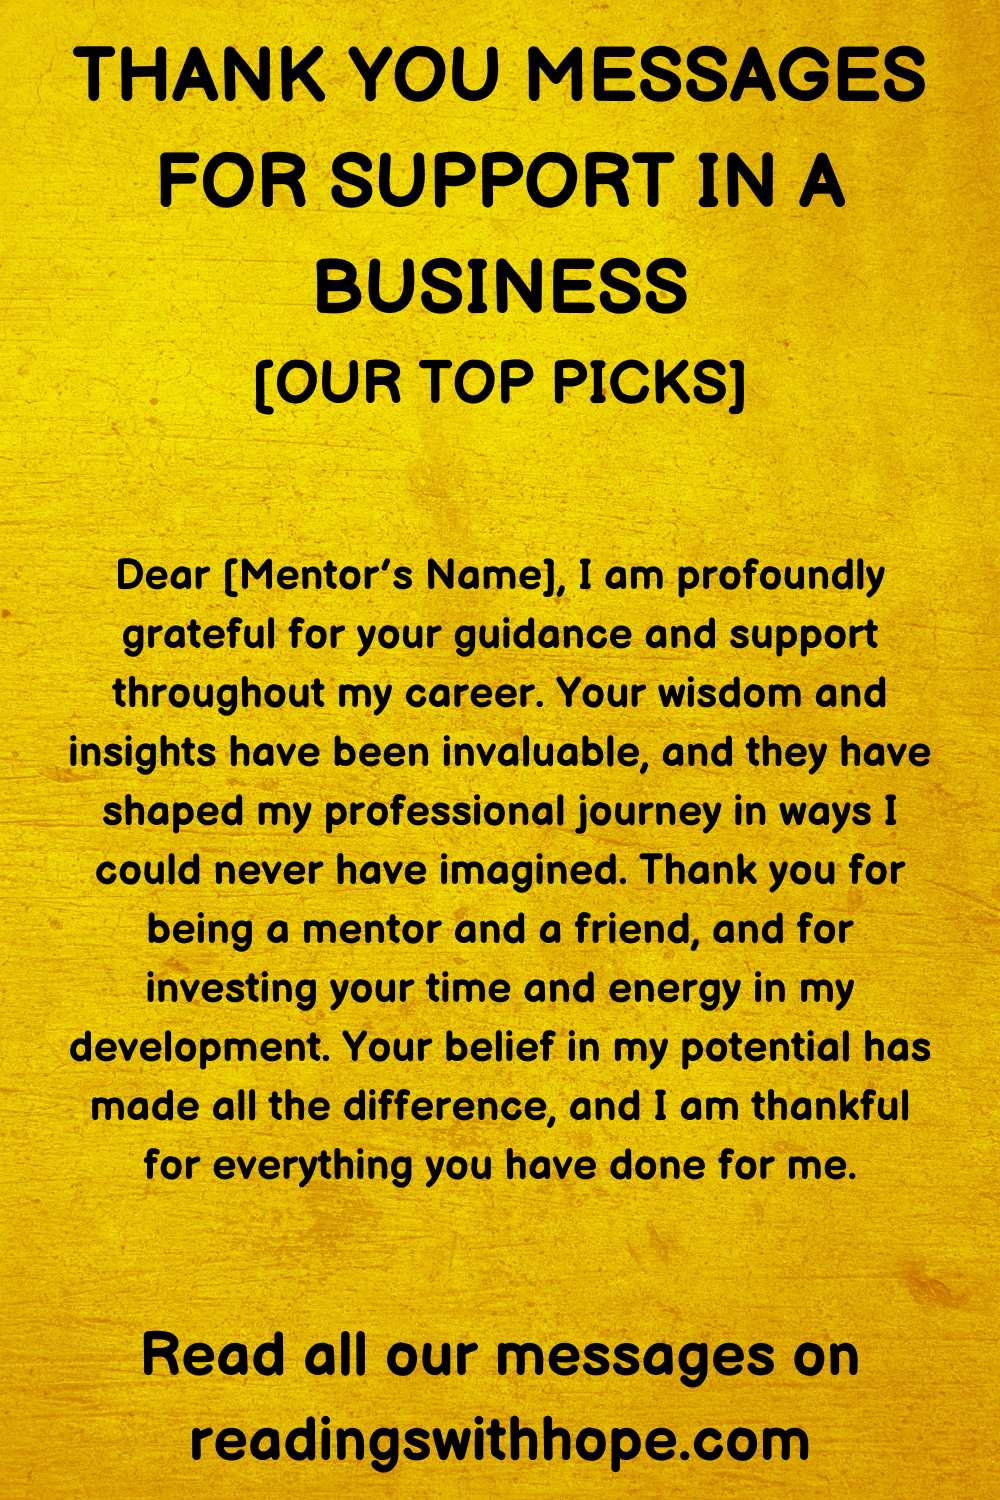 Thank You Message For Support in a Business